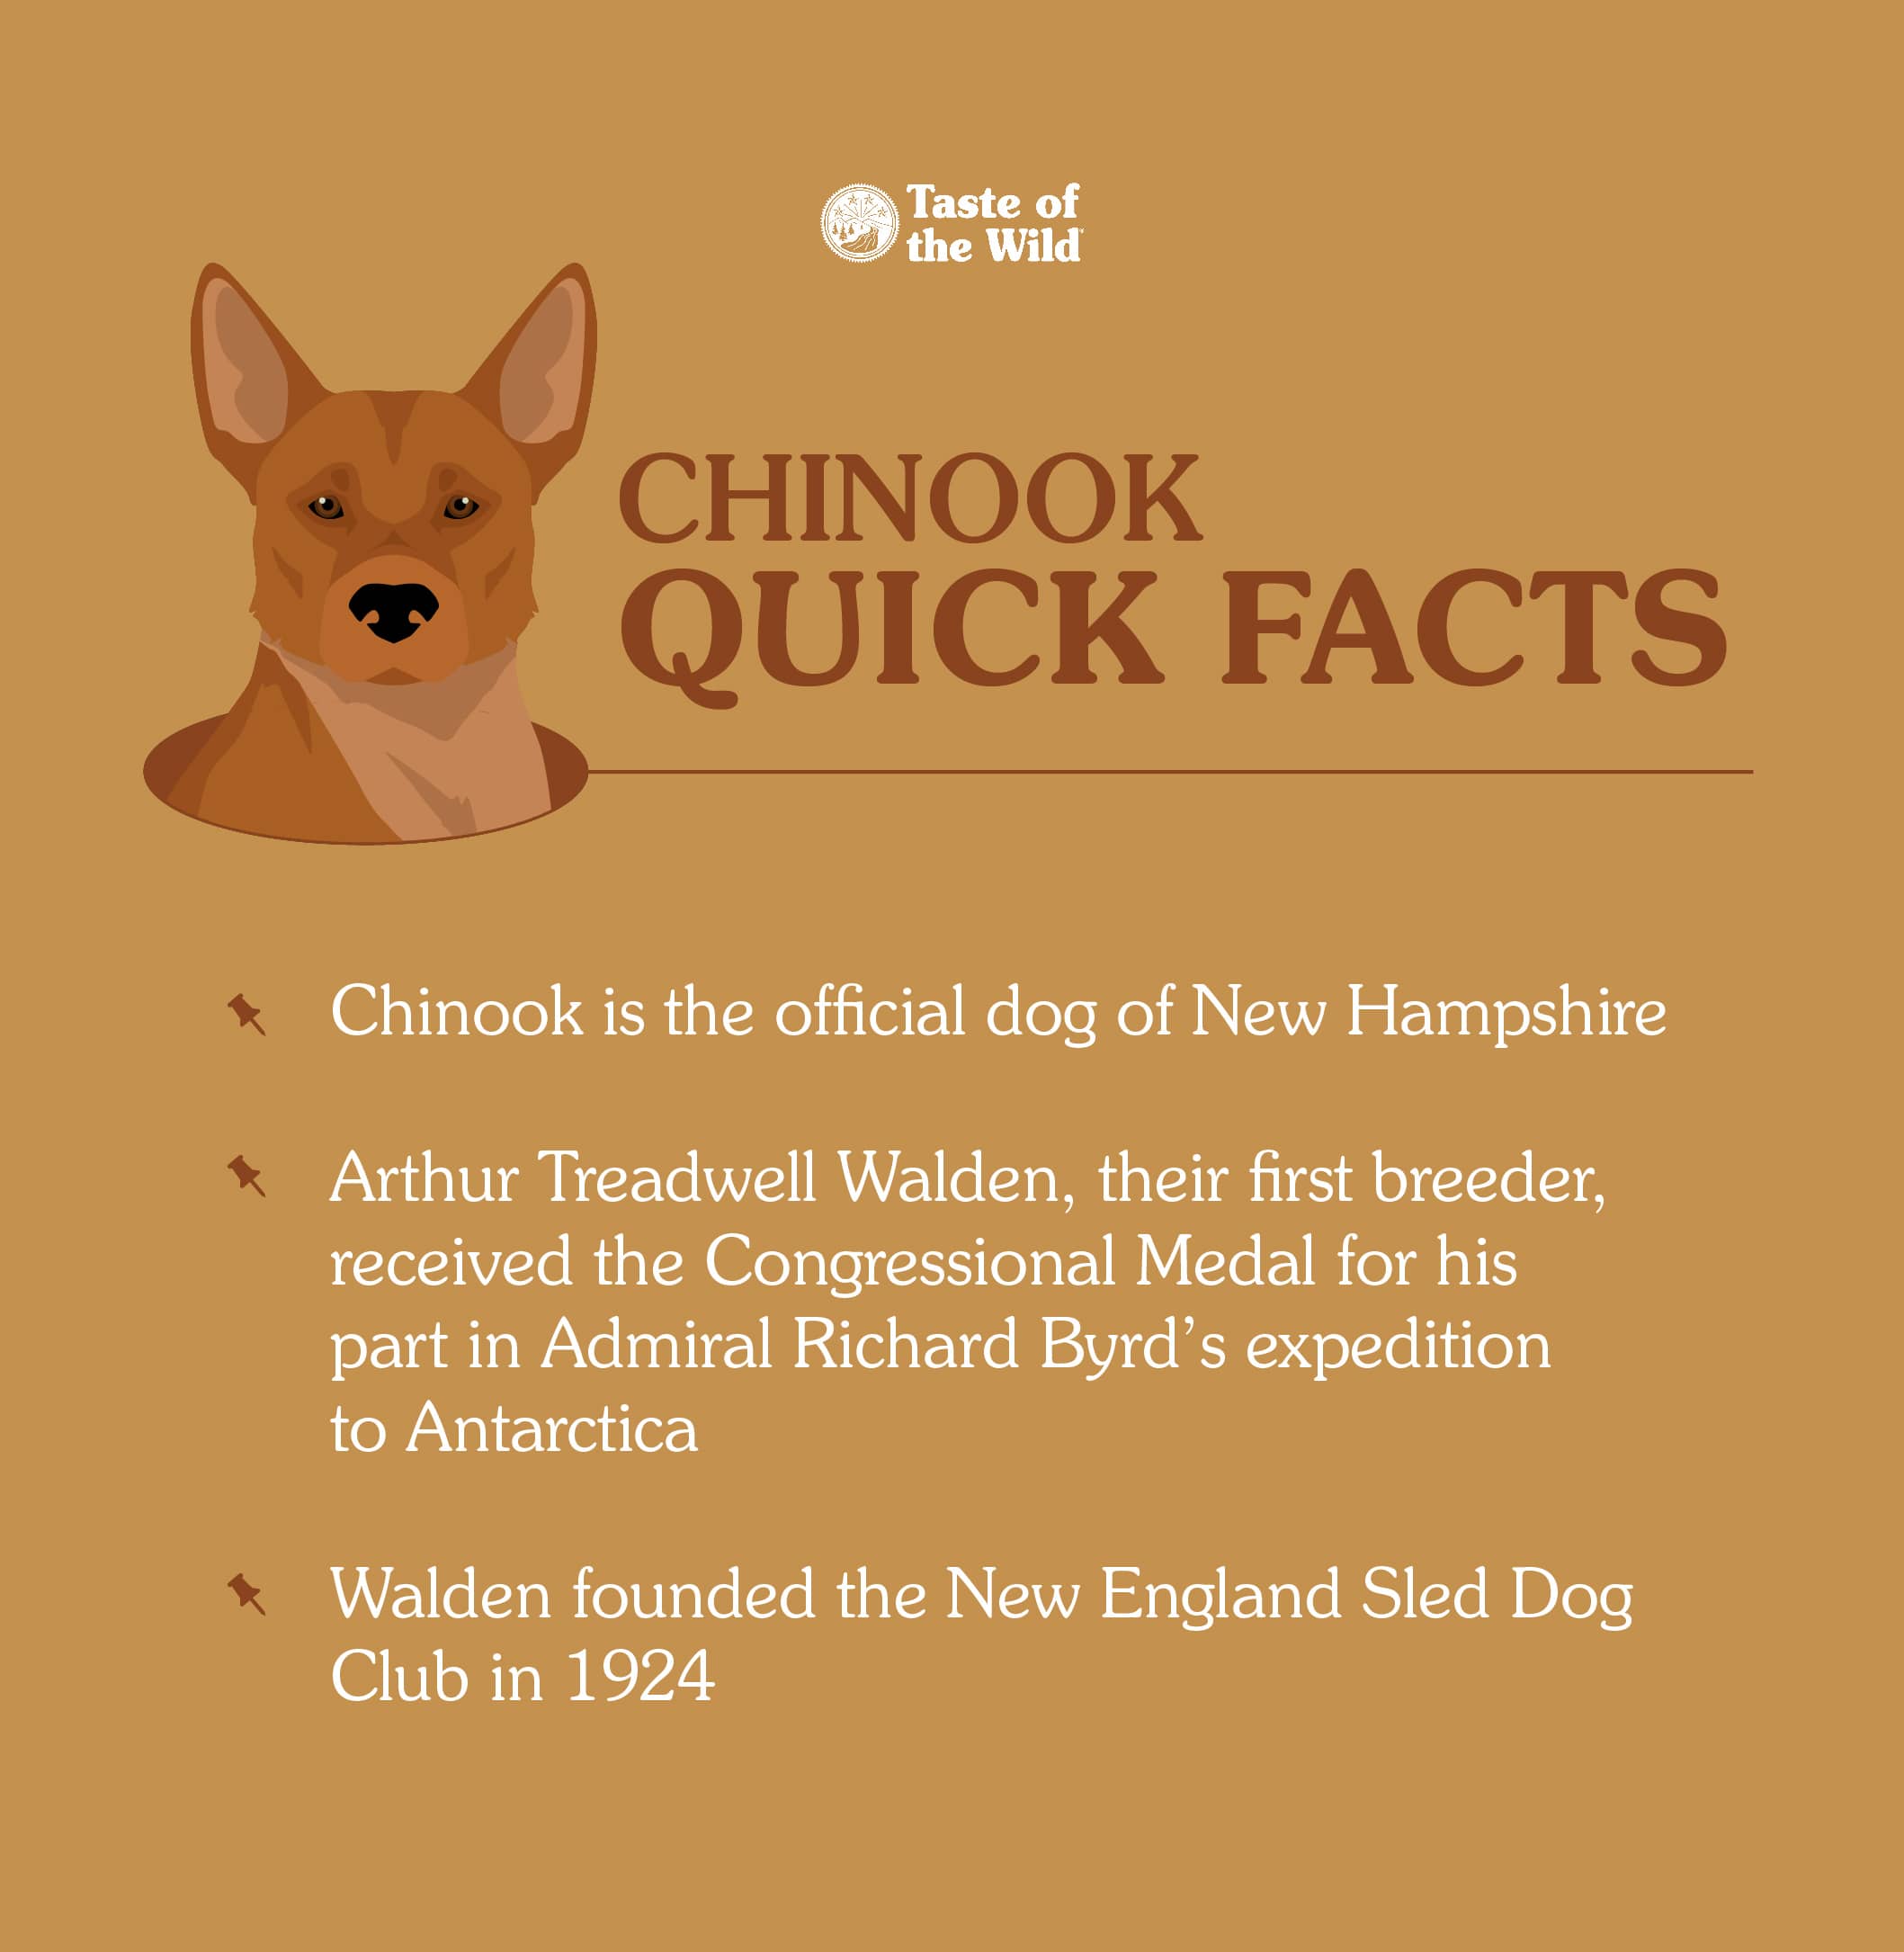 An interior graphic detailing three quick facts about chinook dogs.